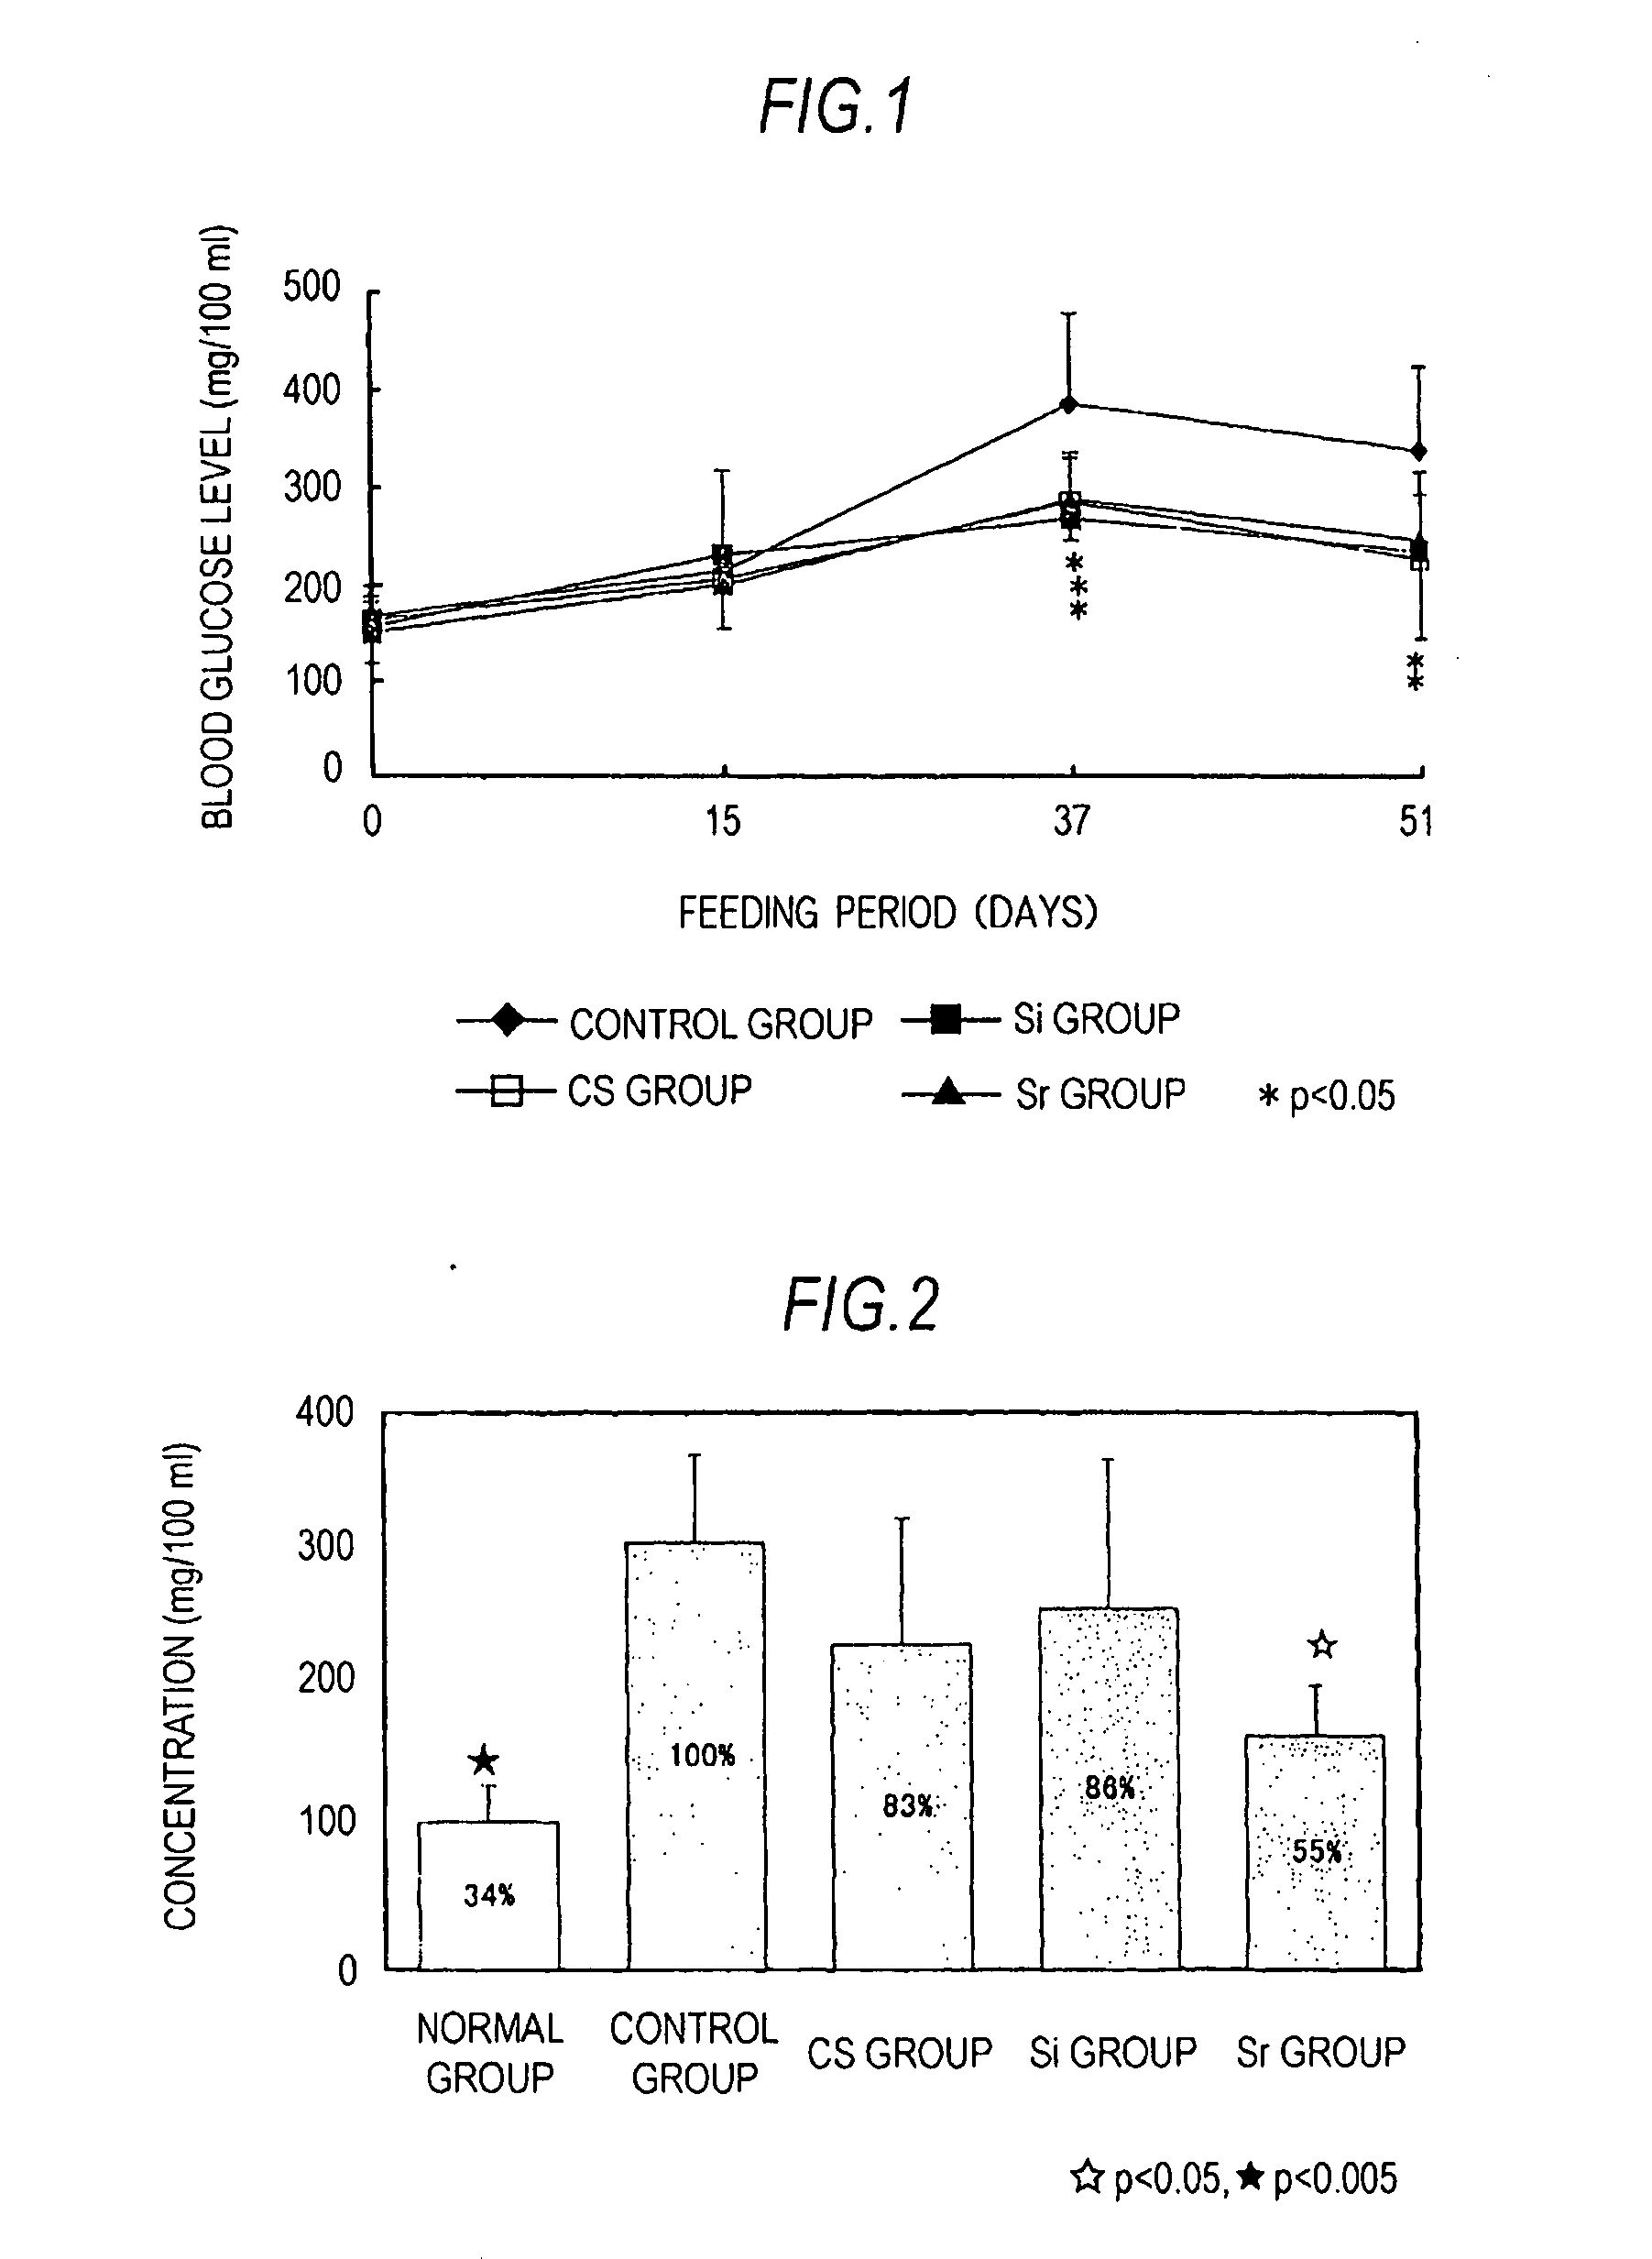 Agent for prevention or treatment of blood glucose level elevation